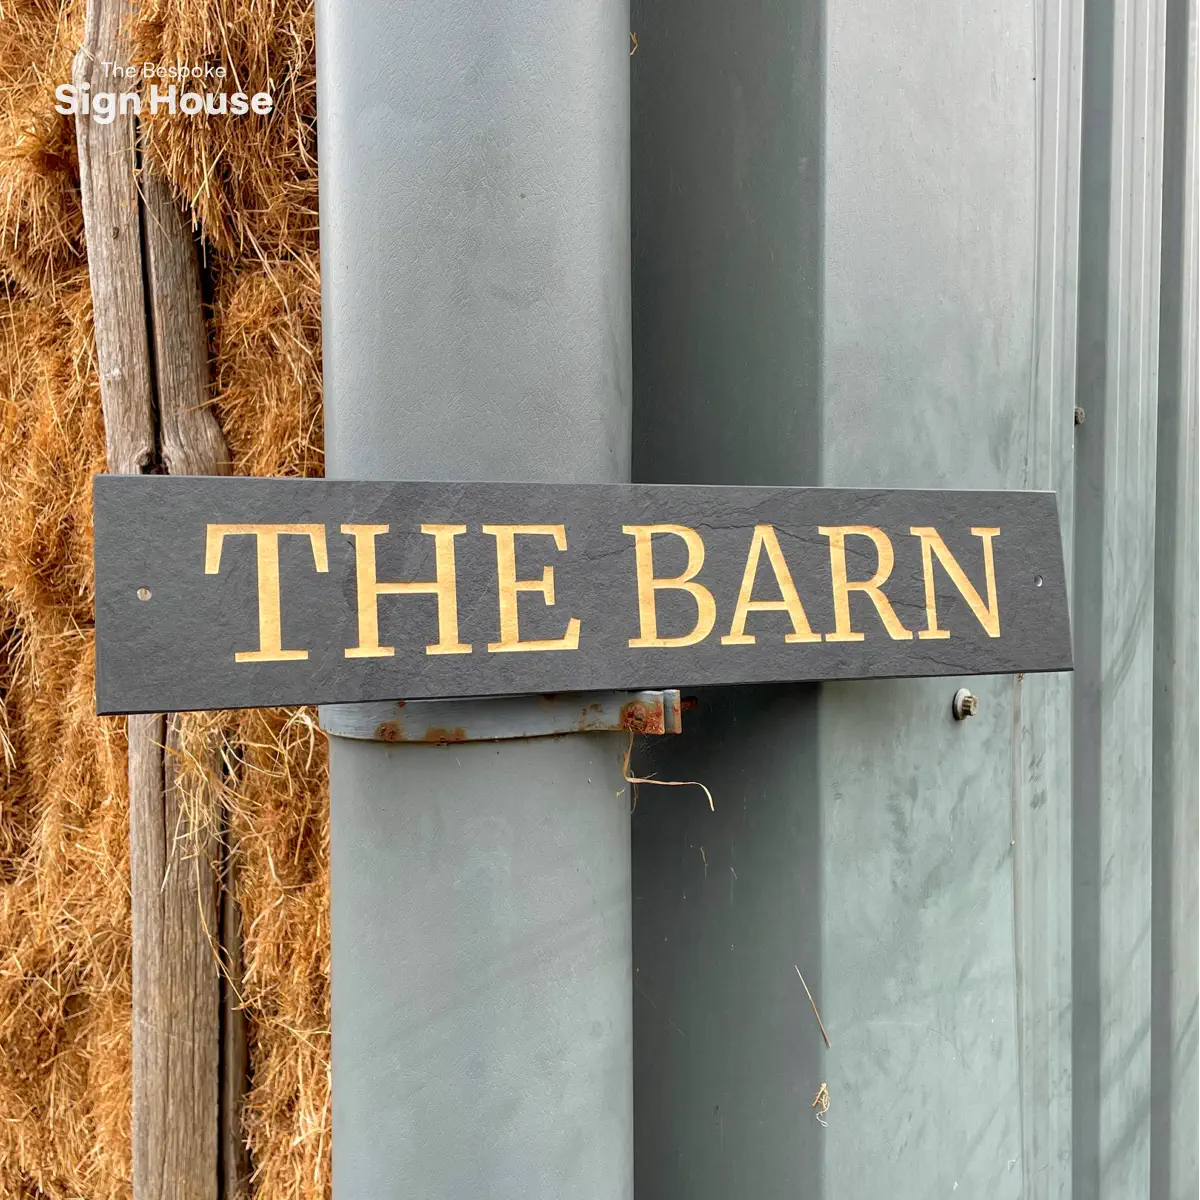 The barn sign